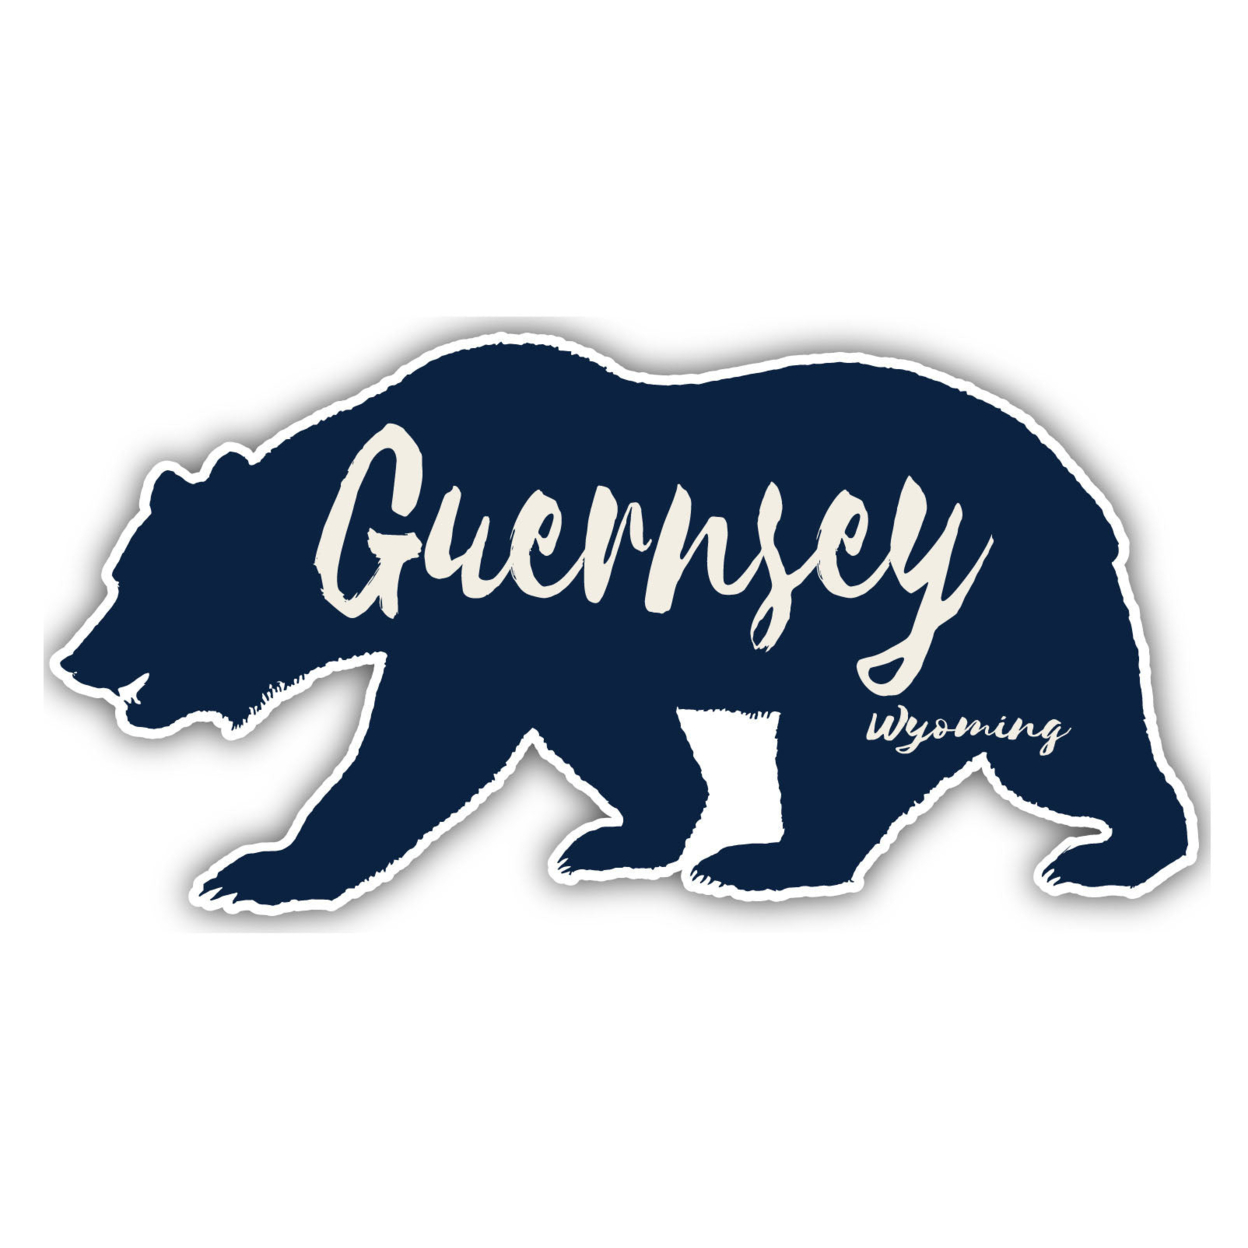 Guernsey Wyoming Souvenir Decorative Stickers (Choose Theme And Size) - Single Unit, 10-Inch, Bear